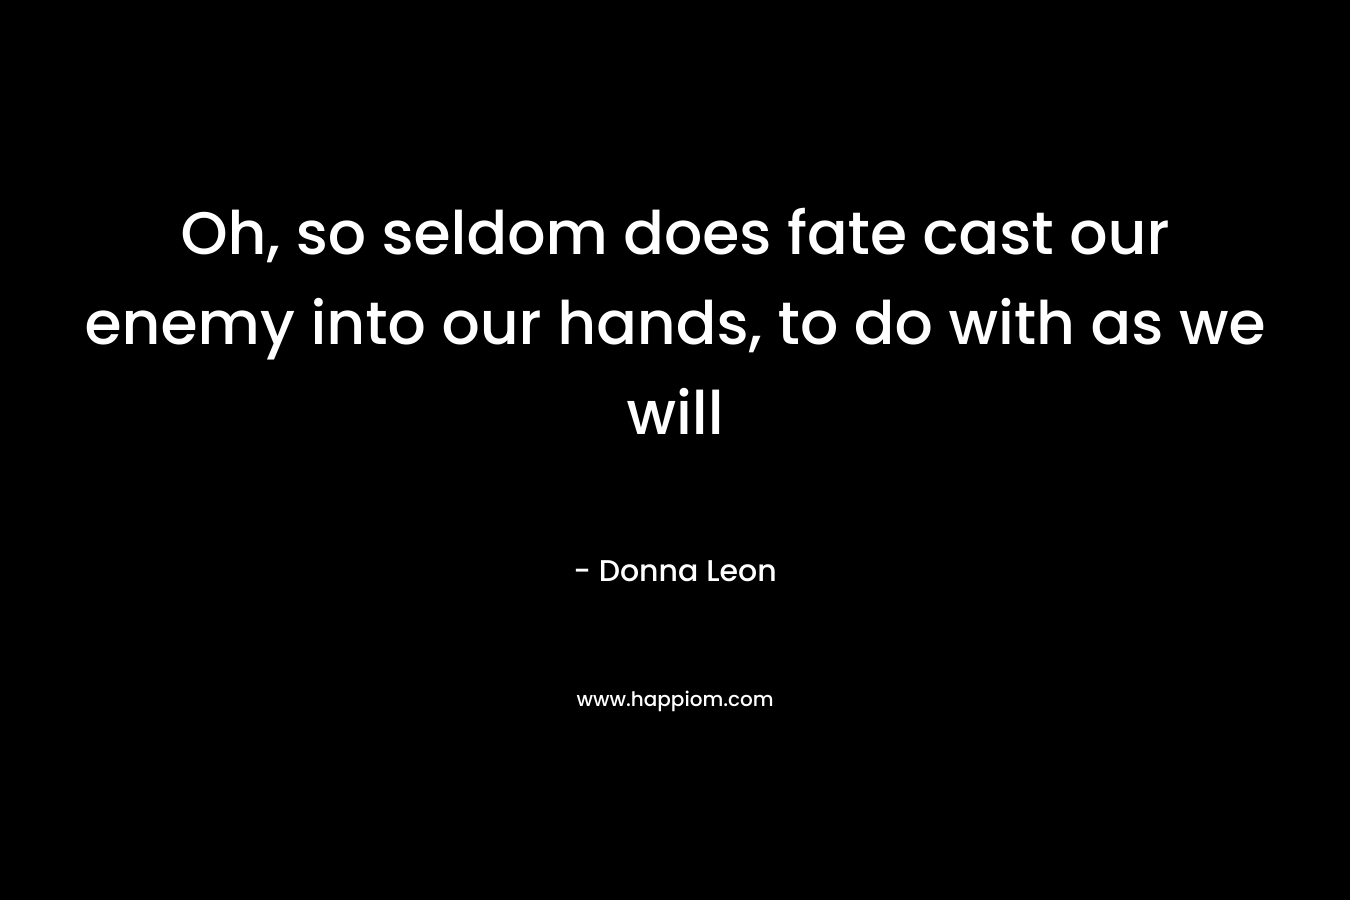 Oh, so seldom does fate cast our enemy into our hands, to do with as we will – Donna Leon